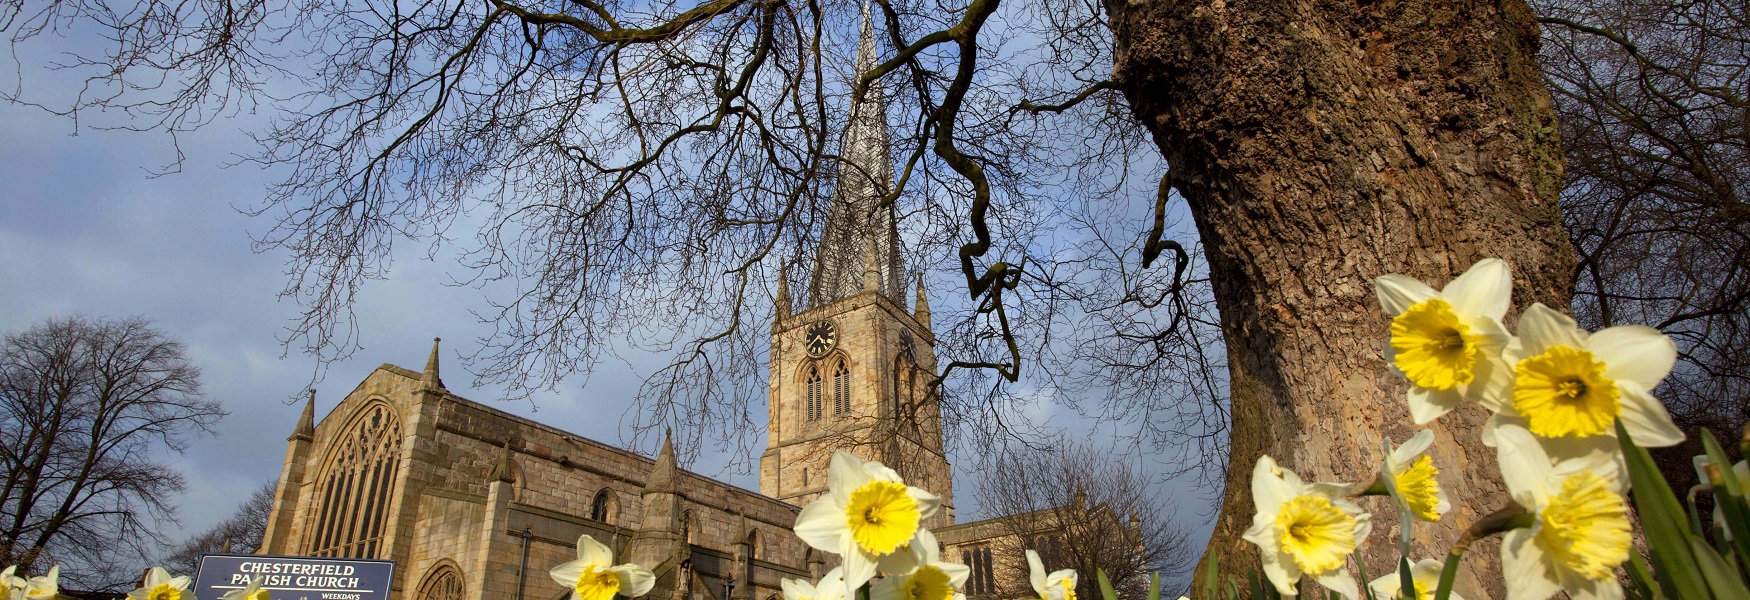 View of Chesterfield's Crooked Spire Church